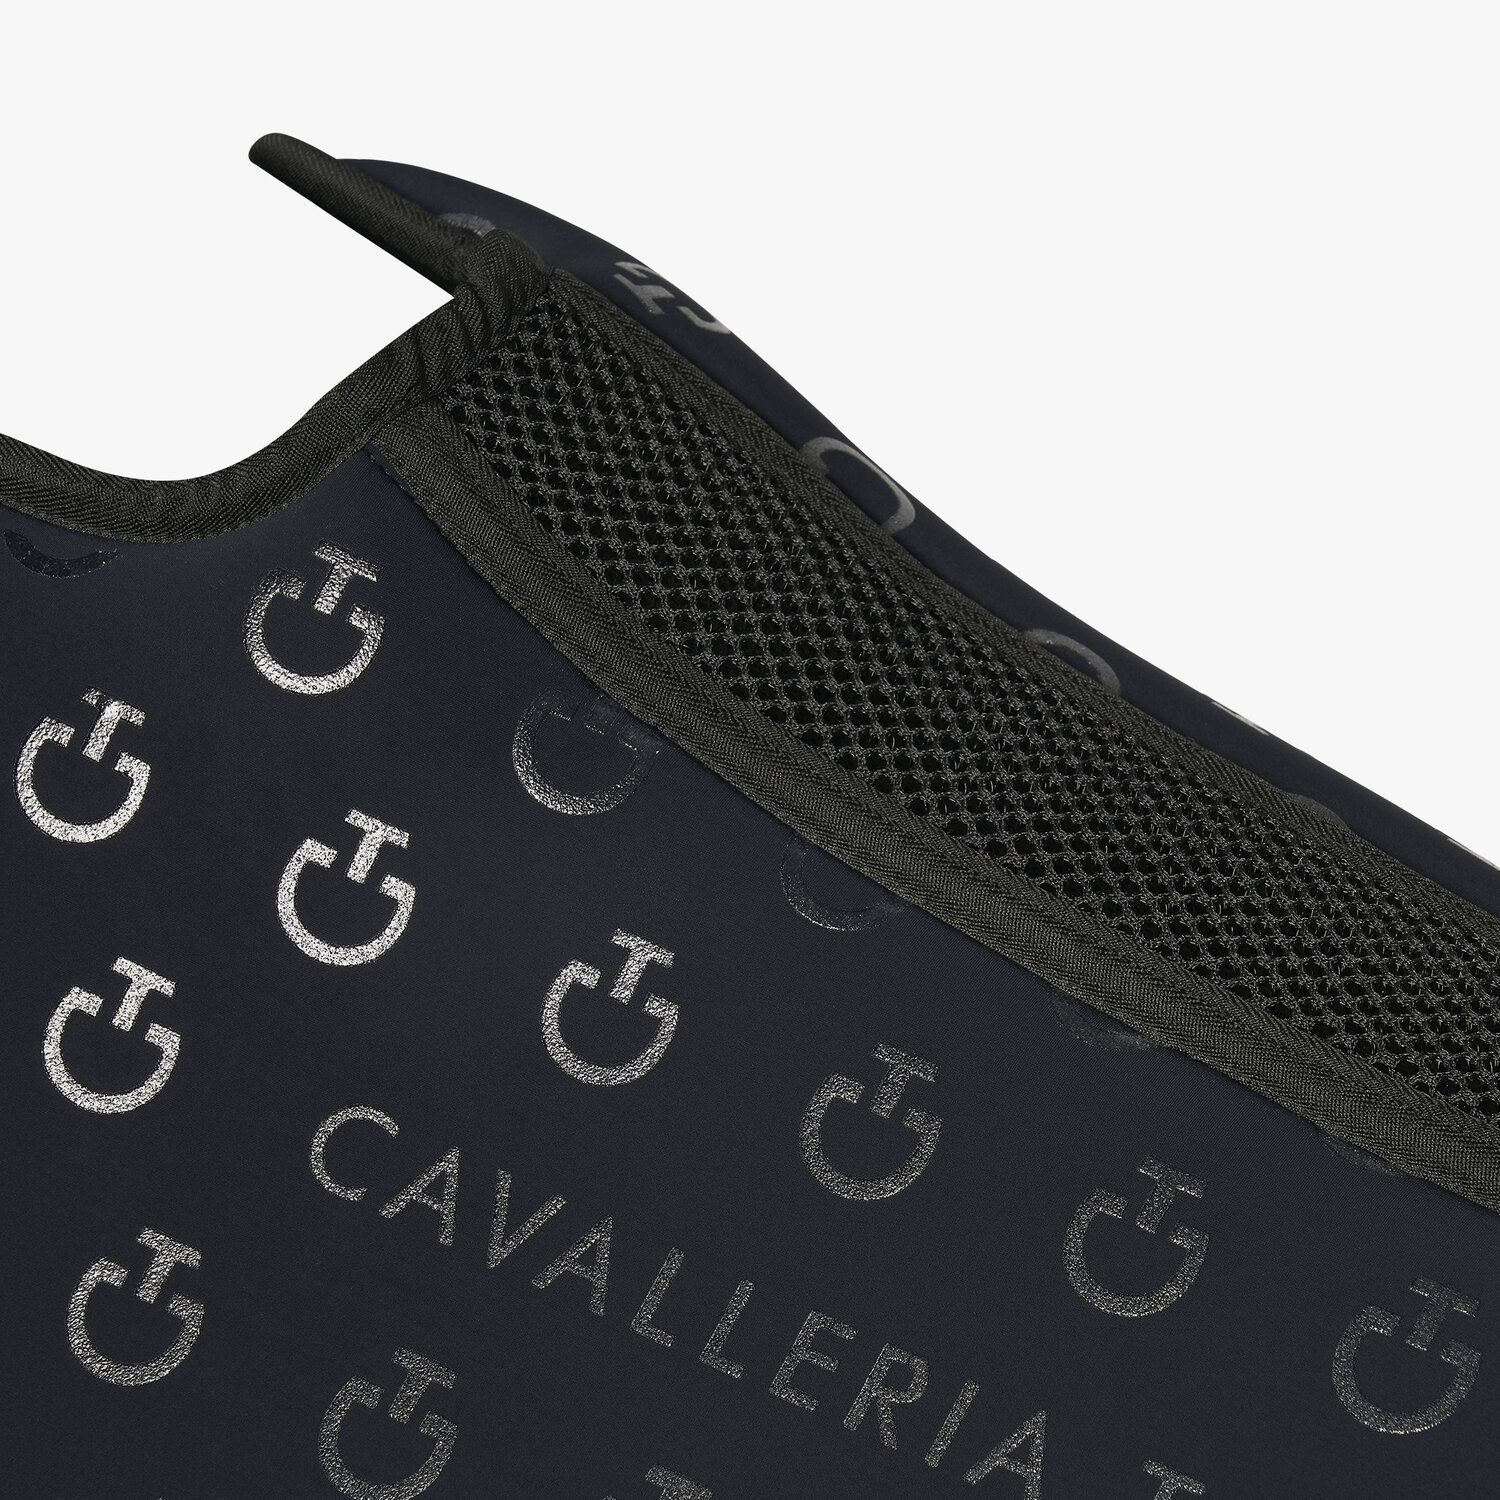 Cavalleria Toscana Jumping Half Pad - Extra wither clearance